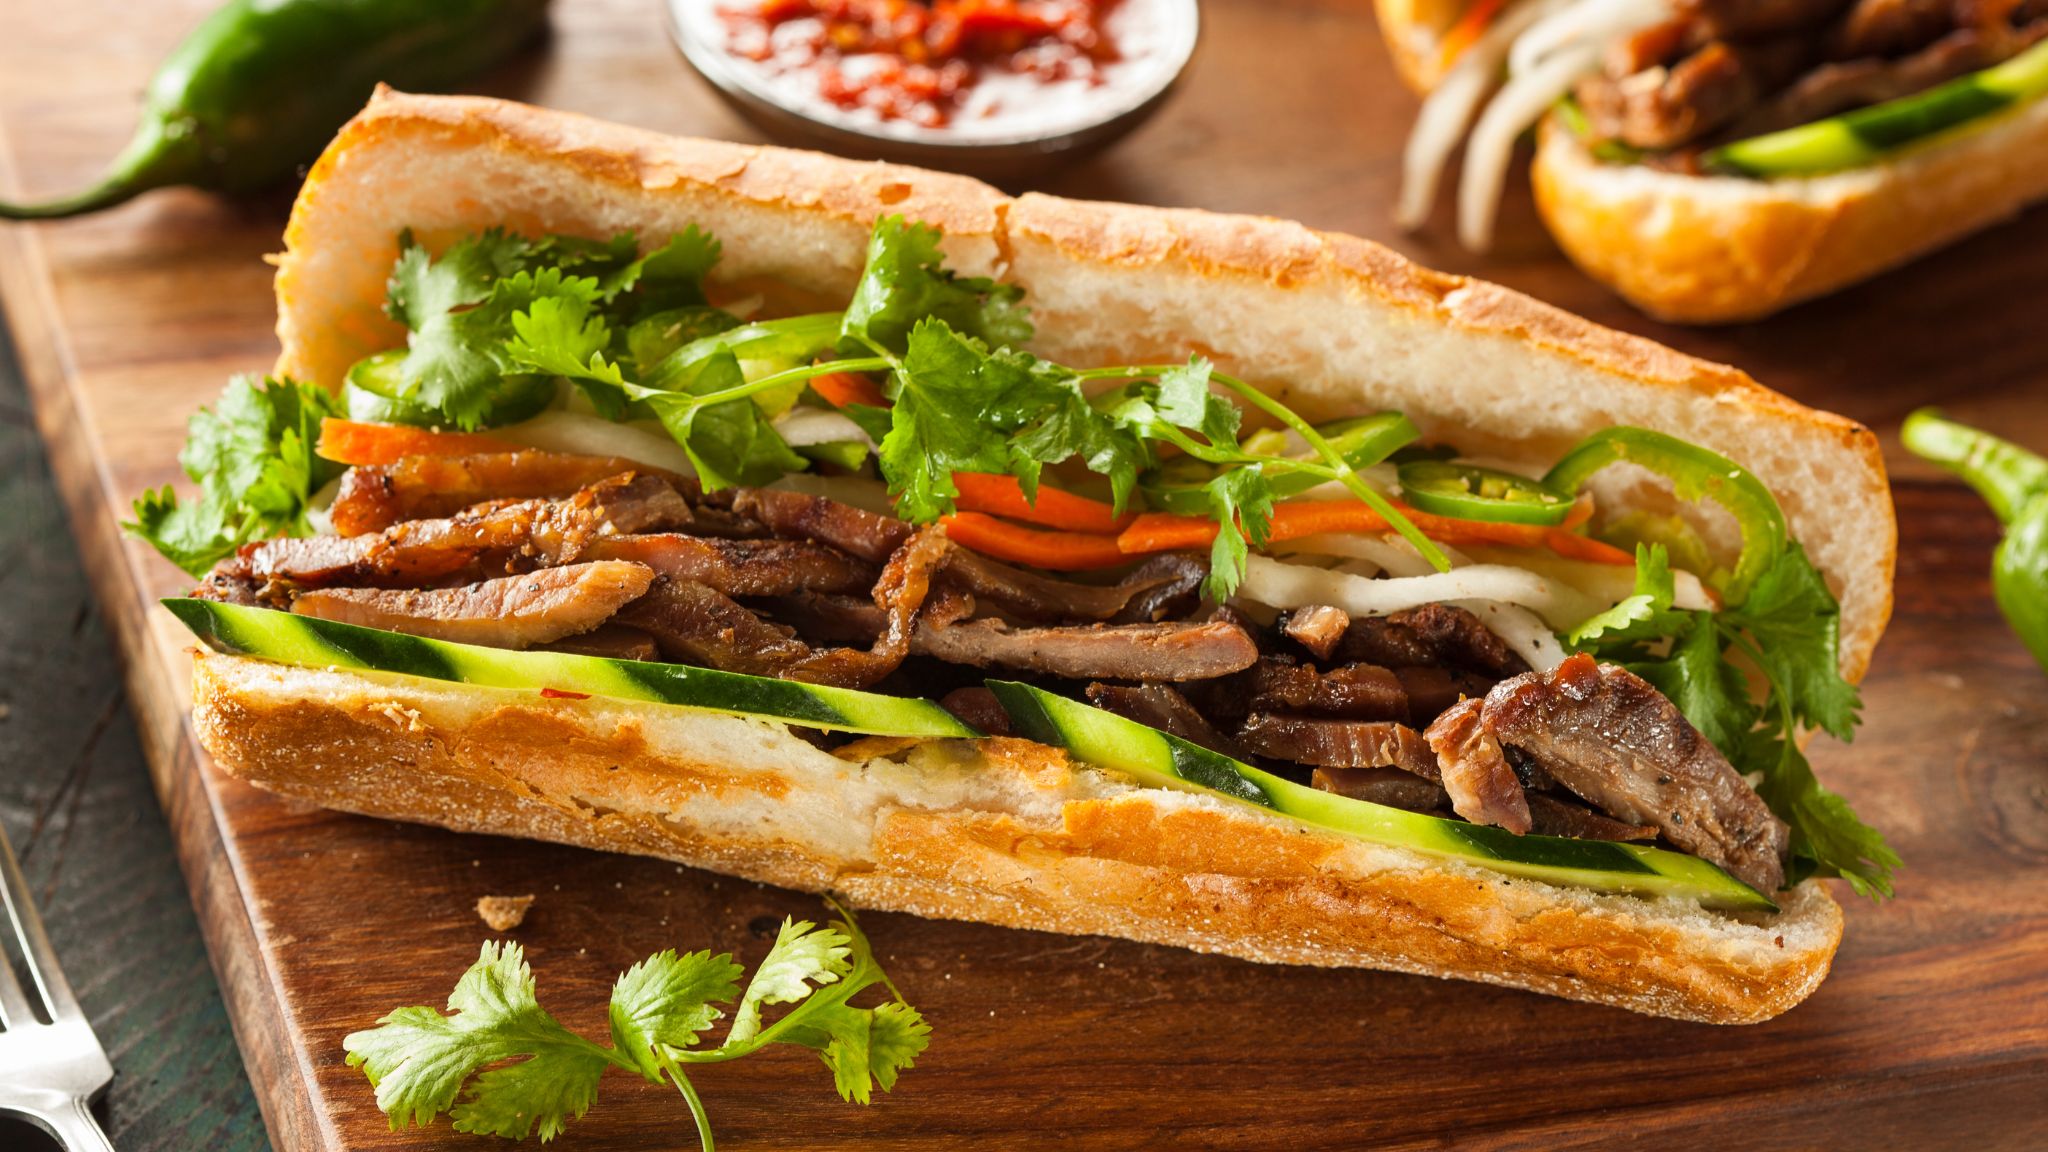 Try The Authentic Vietnamese Banh Mi